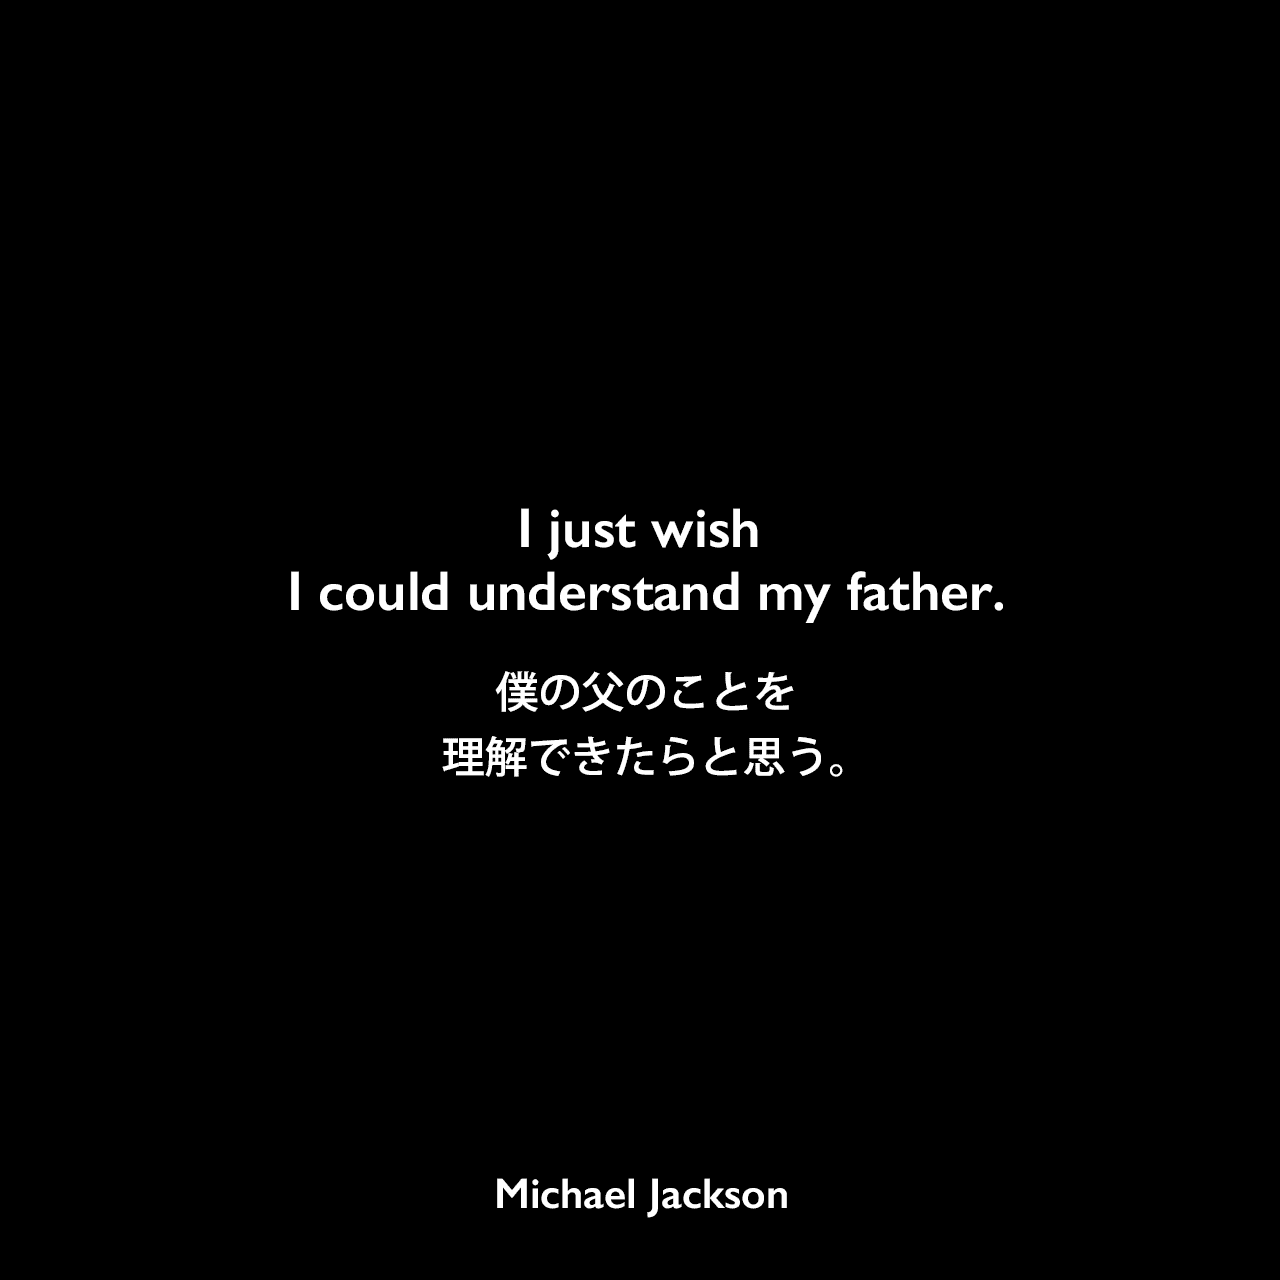 I just wish I could understand my father.僕の父のことを理解できたらと思う。Michael Jackson